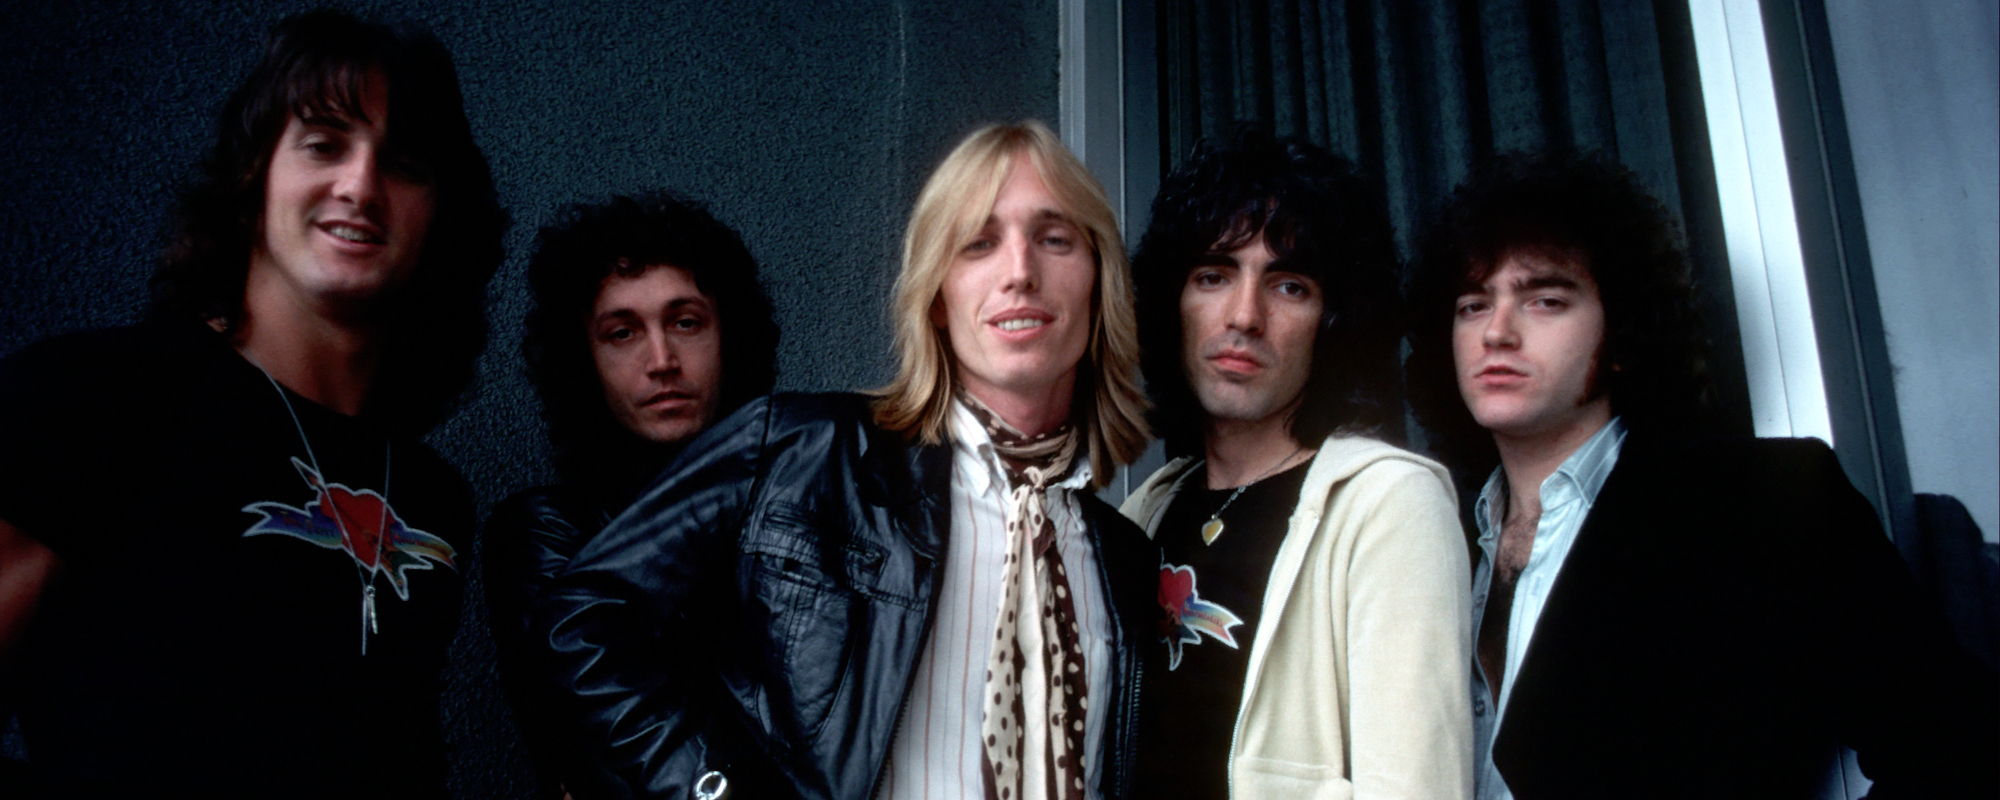 Behind the Album: How ‘Damn the Torpedoes’ Made Tom Petty and the Heartbreakers a Crossover Superstar